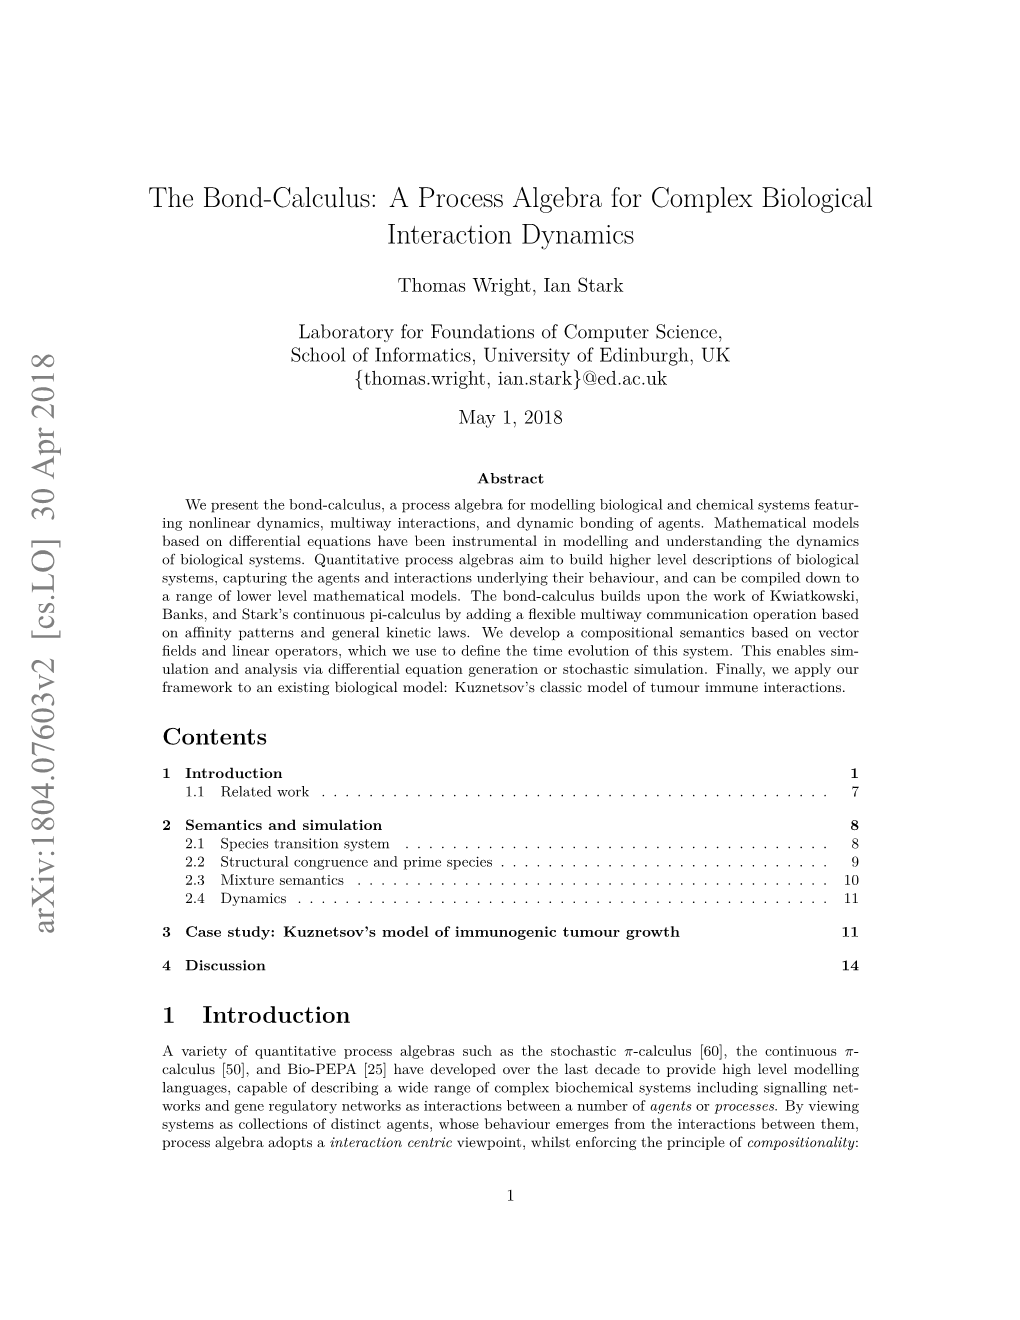 The Bond-Calculus: a Process Algebra for Complex Biological Interaction Dynamics